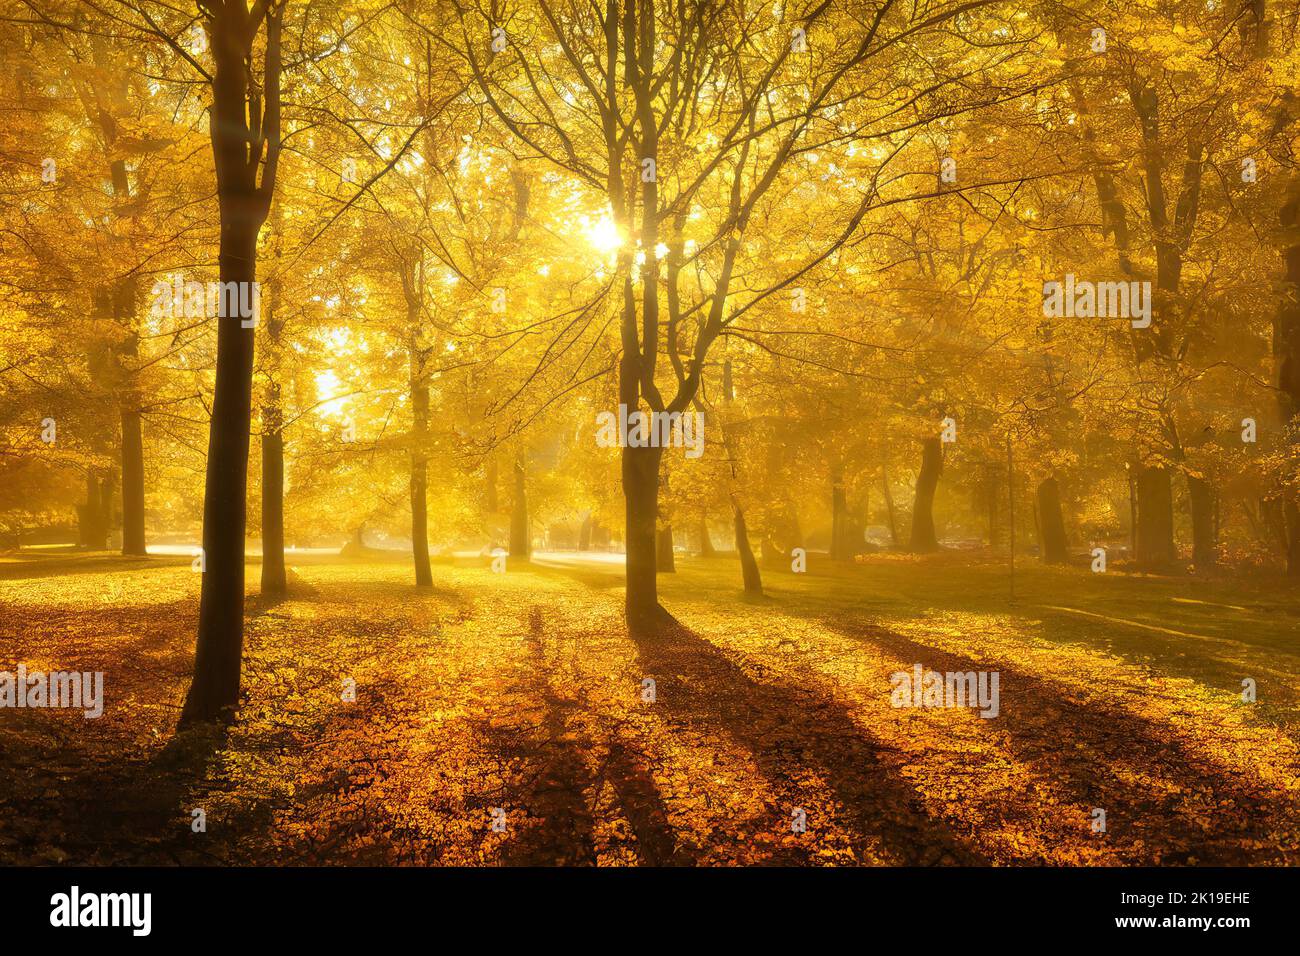 Sun shining through the branches of golden autumn trees in a park, evening long shadows, backlit tree silhouettes. Digital illustration based on rende Stock Photo